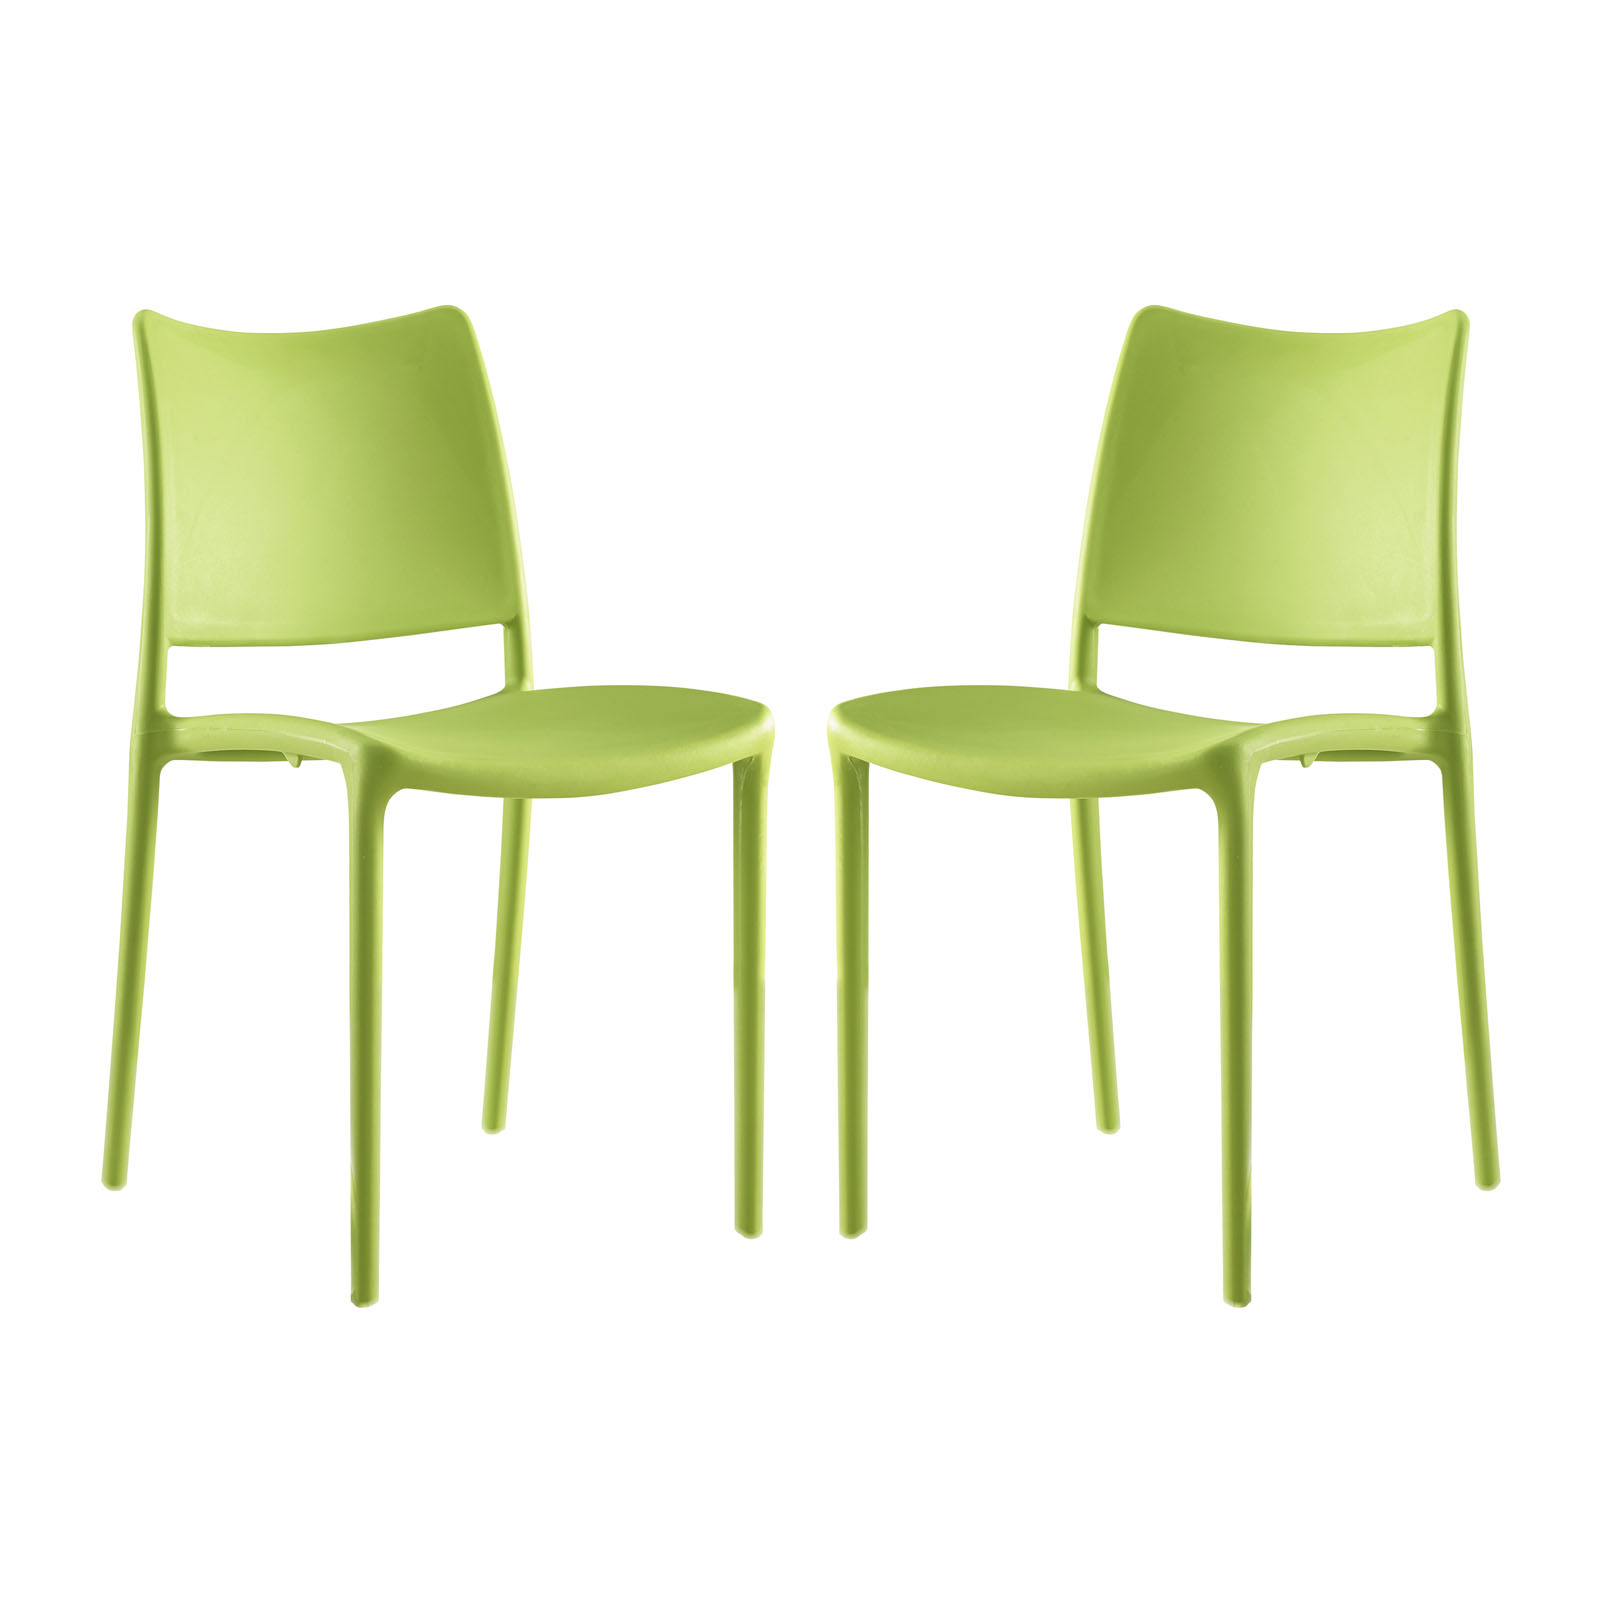 Modern Contemporary Urban Design Outdoor Kitchen Room Dining Chair ( Set of 2), Green, Plastic - image 1 of 4